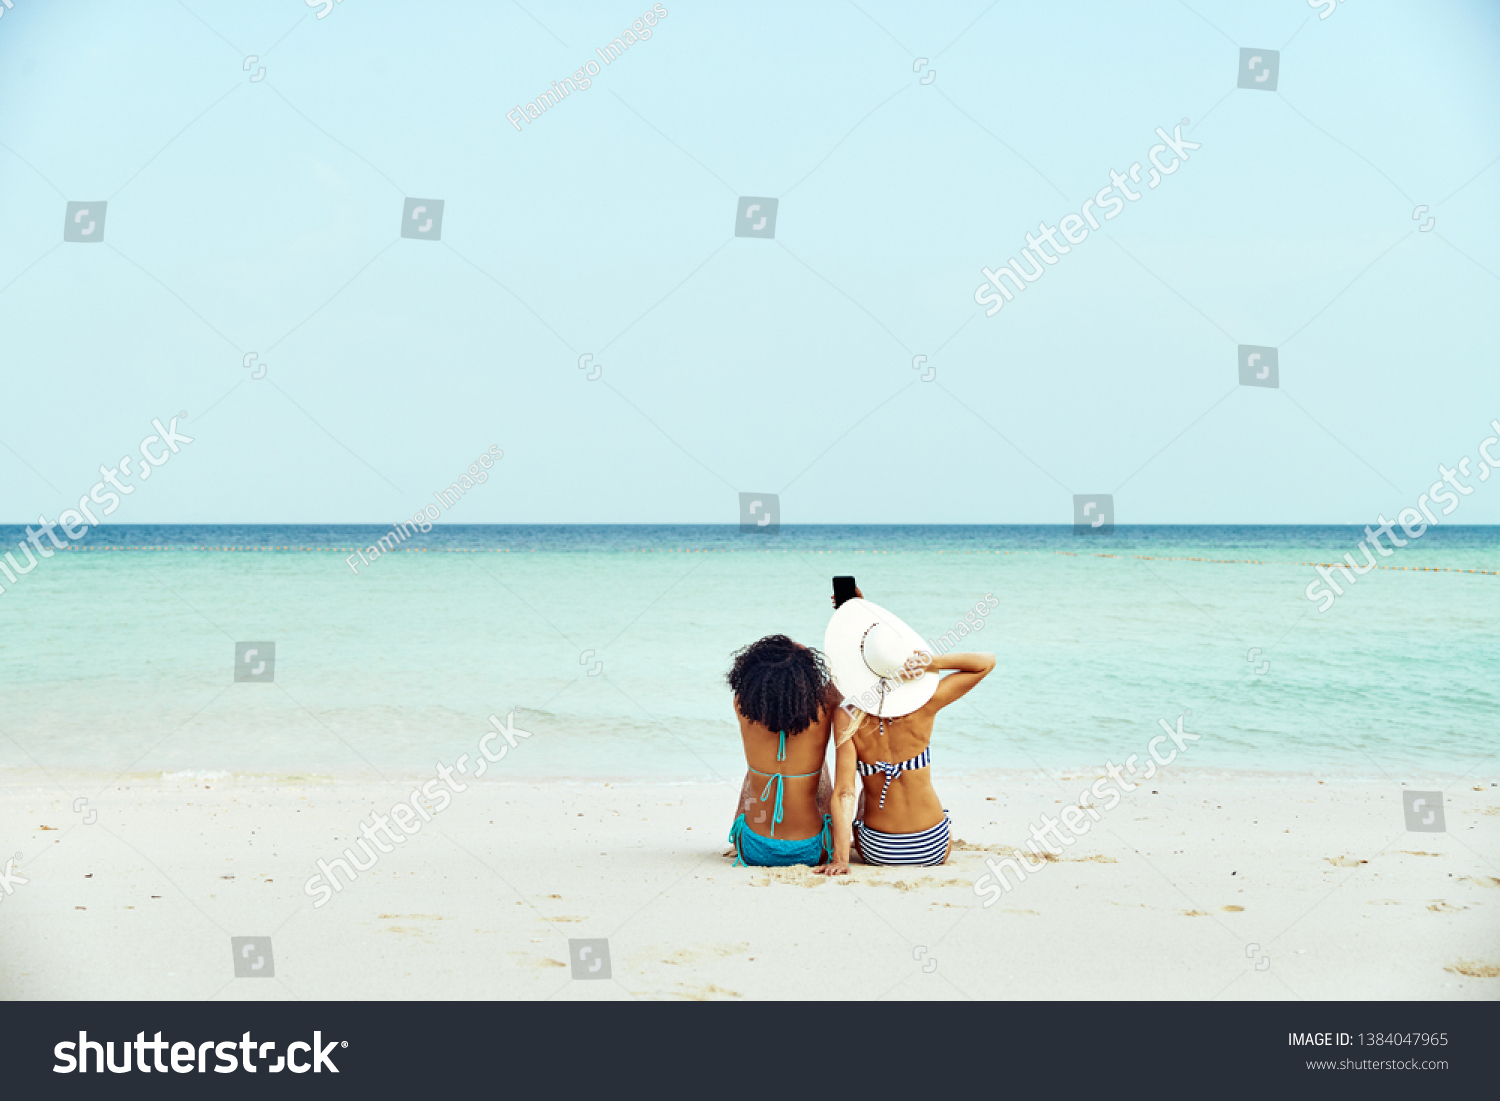 Rearview of two young female friends wearing bikinis and taking selfies while suntanning on a sandy beach during a tropical vacation #1384047965